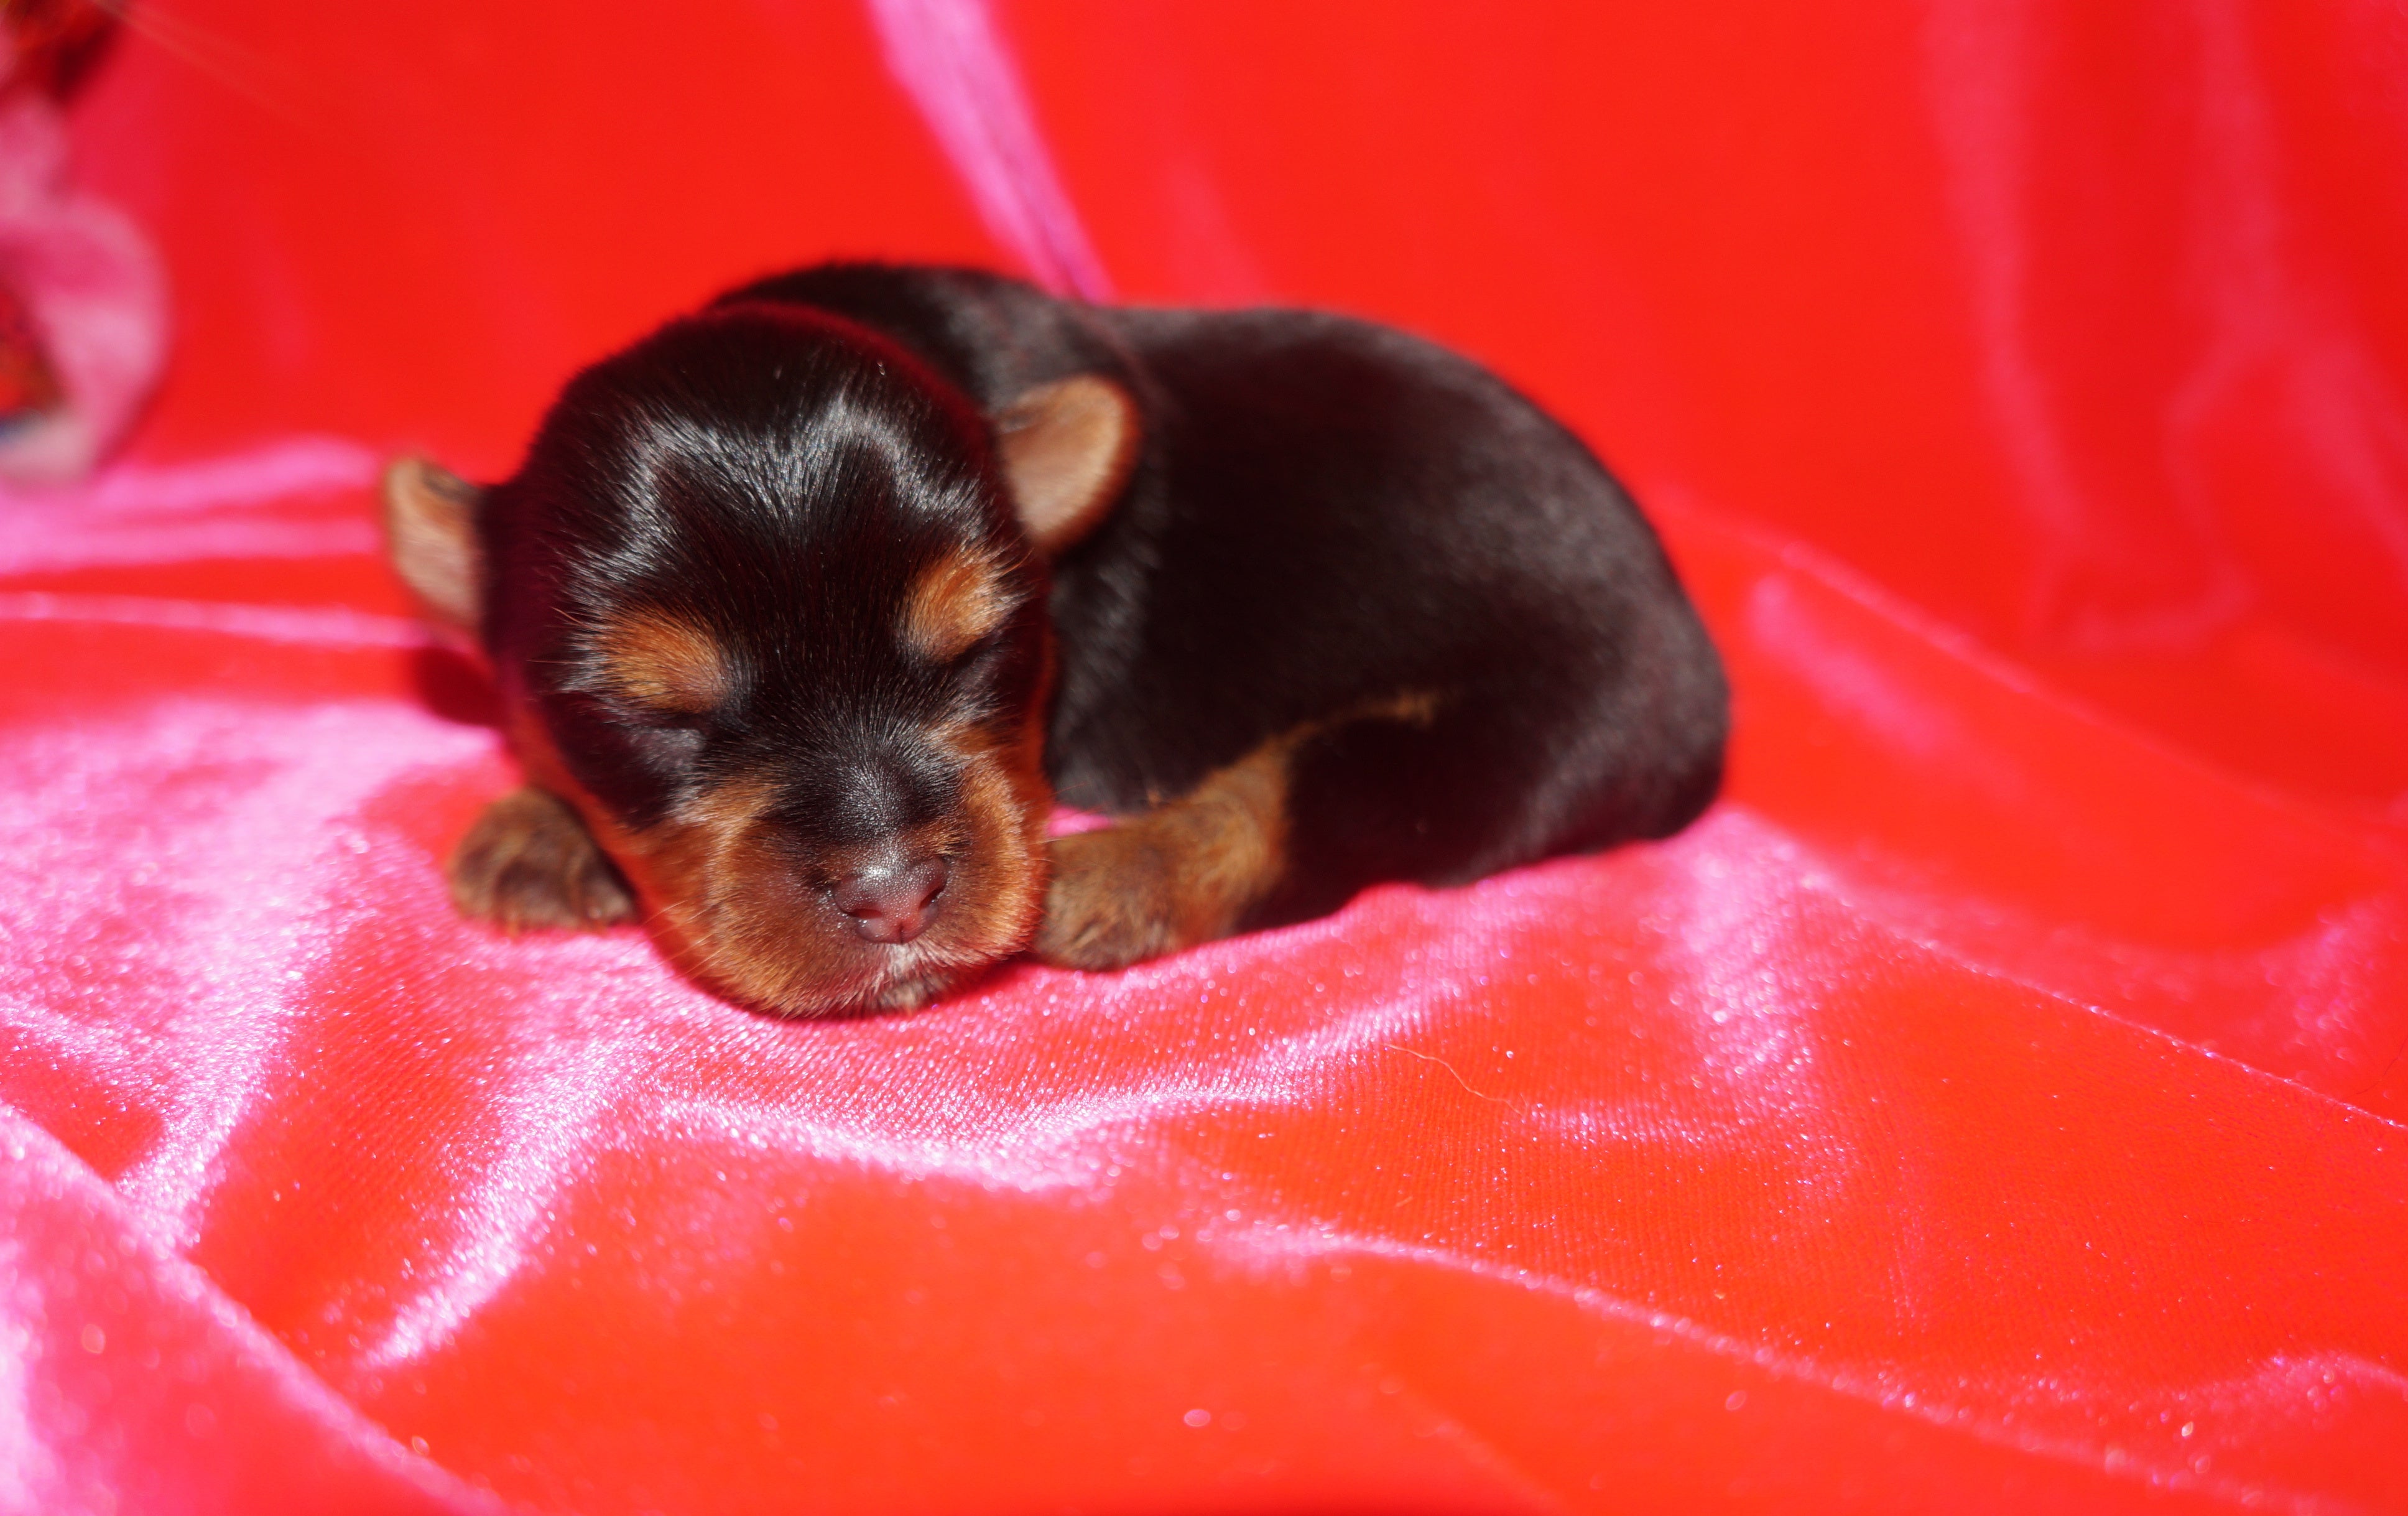 SOLD TO HUNTER!! Cheer AKC Registered Yorkie Yorkshire Terrier Female Black And Gold Born 11-09-2022 READY FOR CHRISTMAS!!